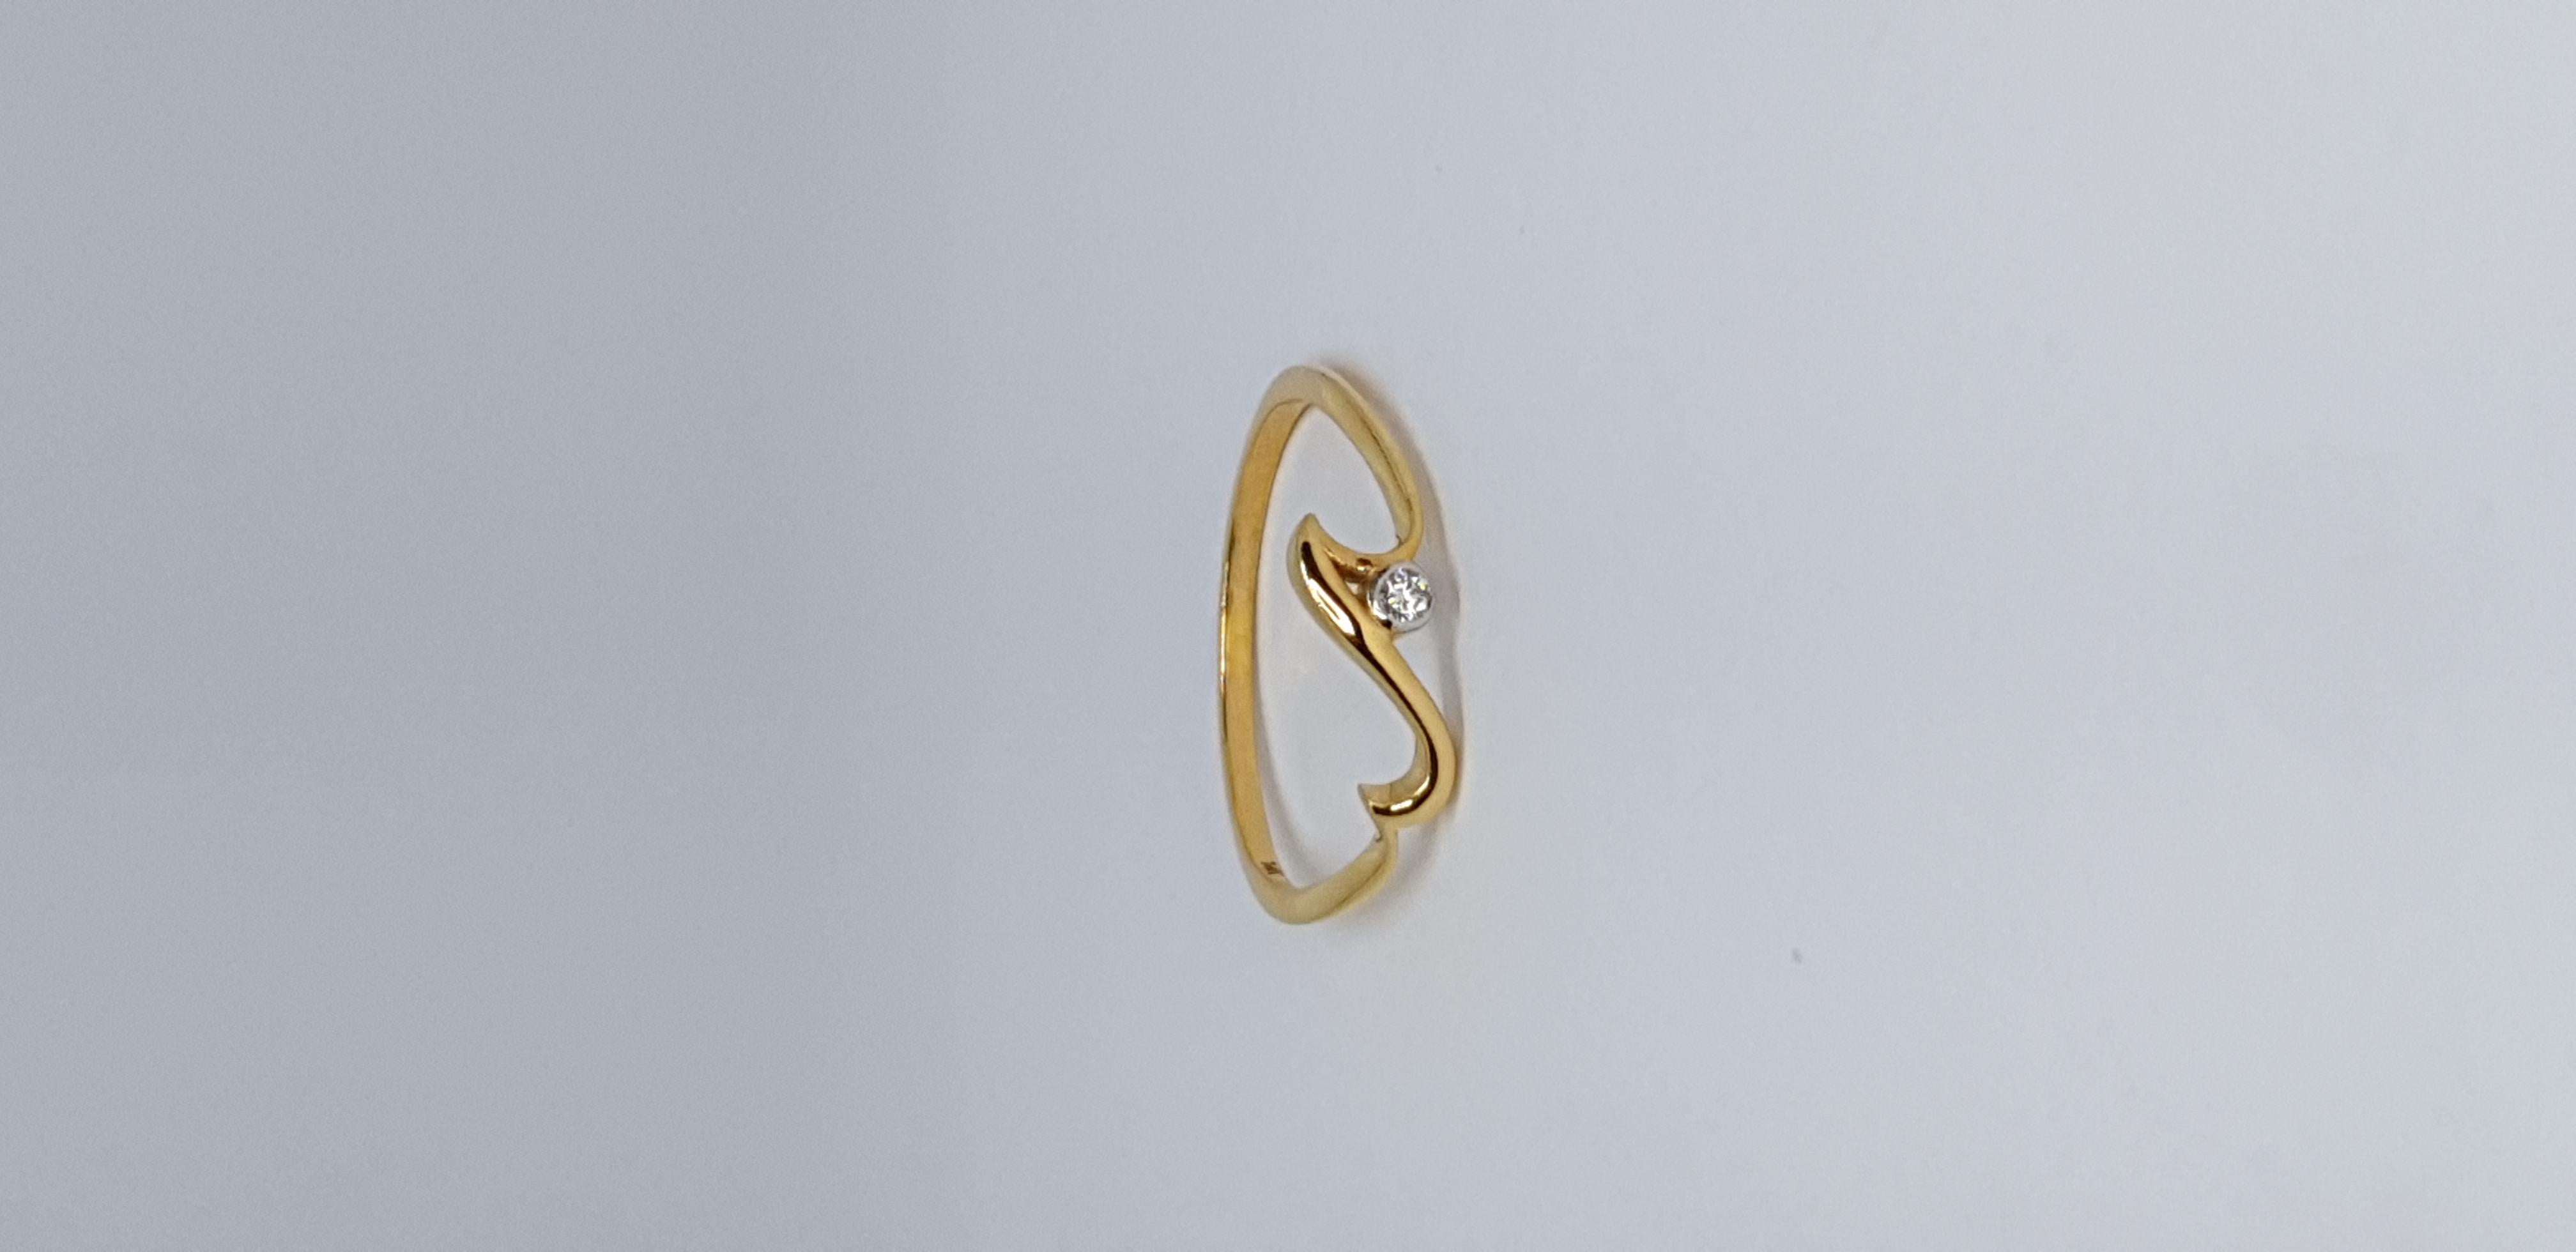 For Sale:  Natural Diamond Wave Ring 14K Solid Gold Dainty Ocean Lover Jewelry Gift. 12